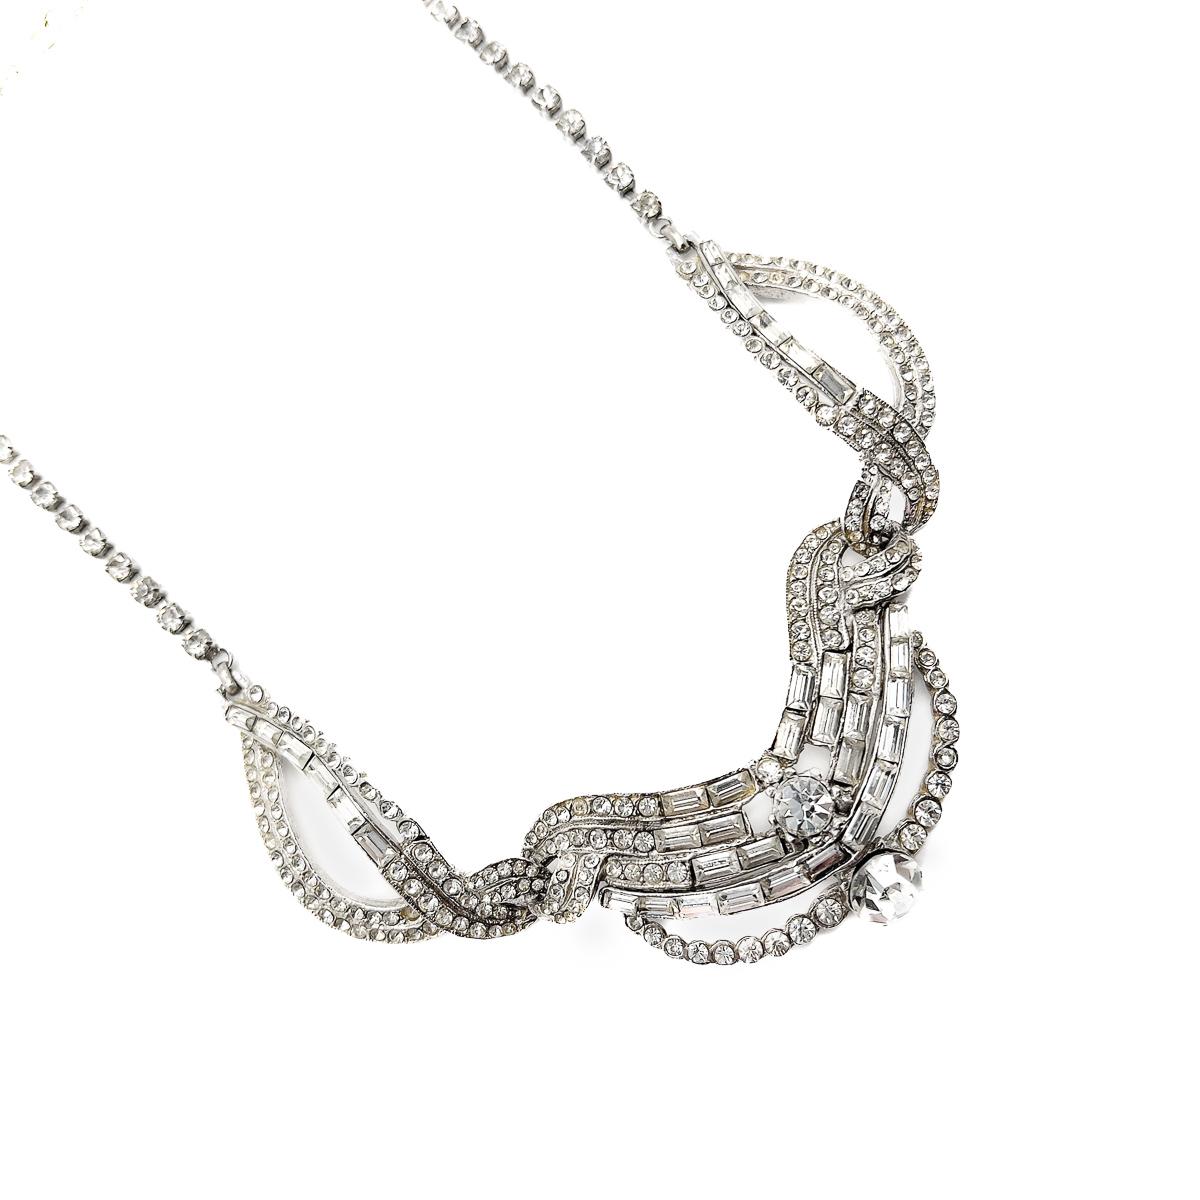 A Vintage Hollywood Deco Paste Necklace. Sublime cocktail style and a forever piece of mid century heritage.
A British costume jewellery company, Hollywood was founded over a century ago in 1918. Necklaces and art deco inspired designs are amongst